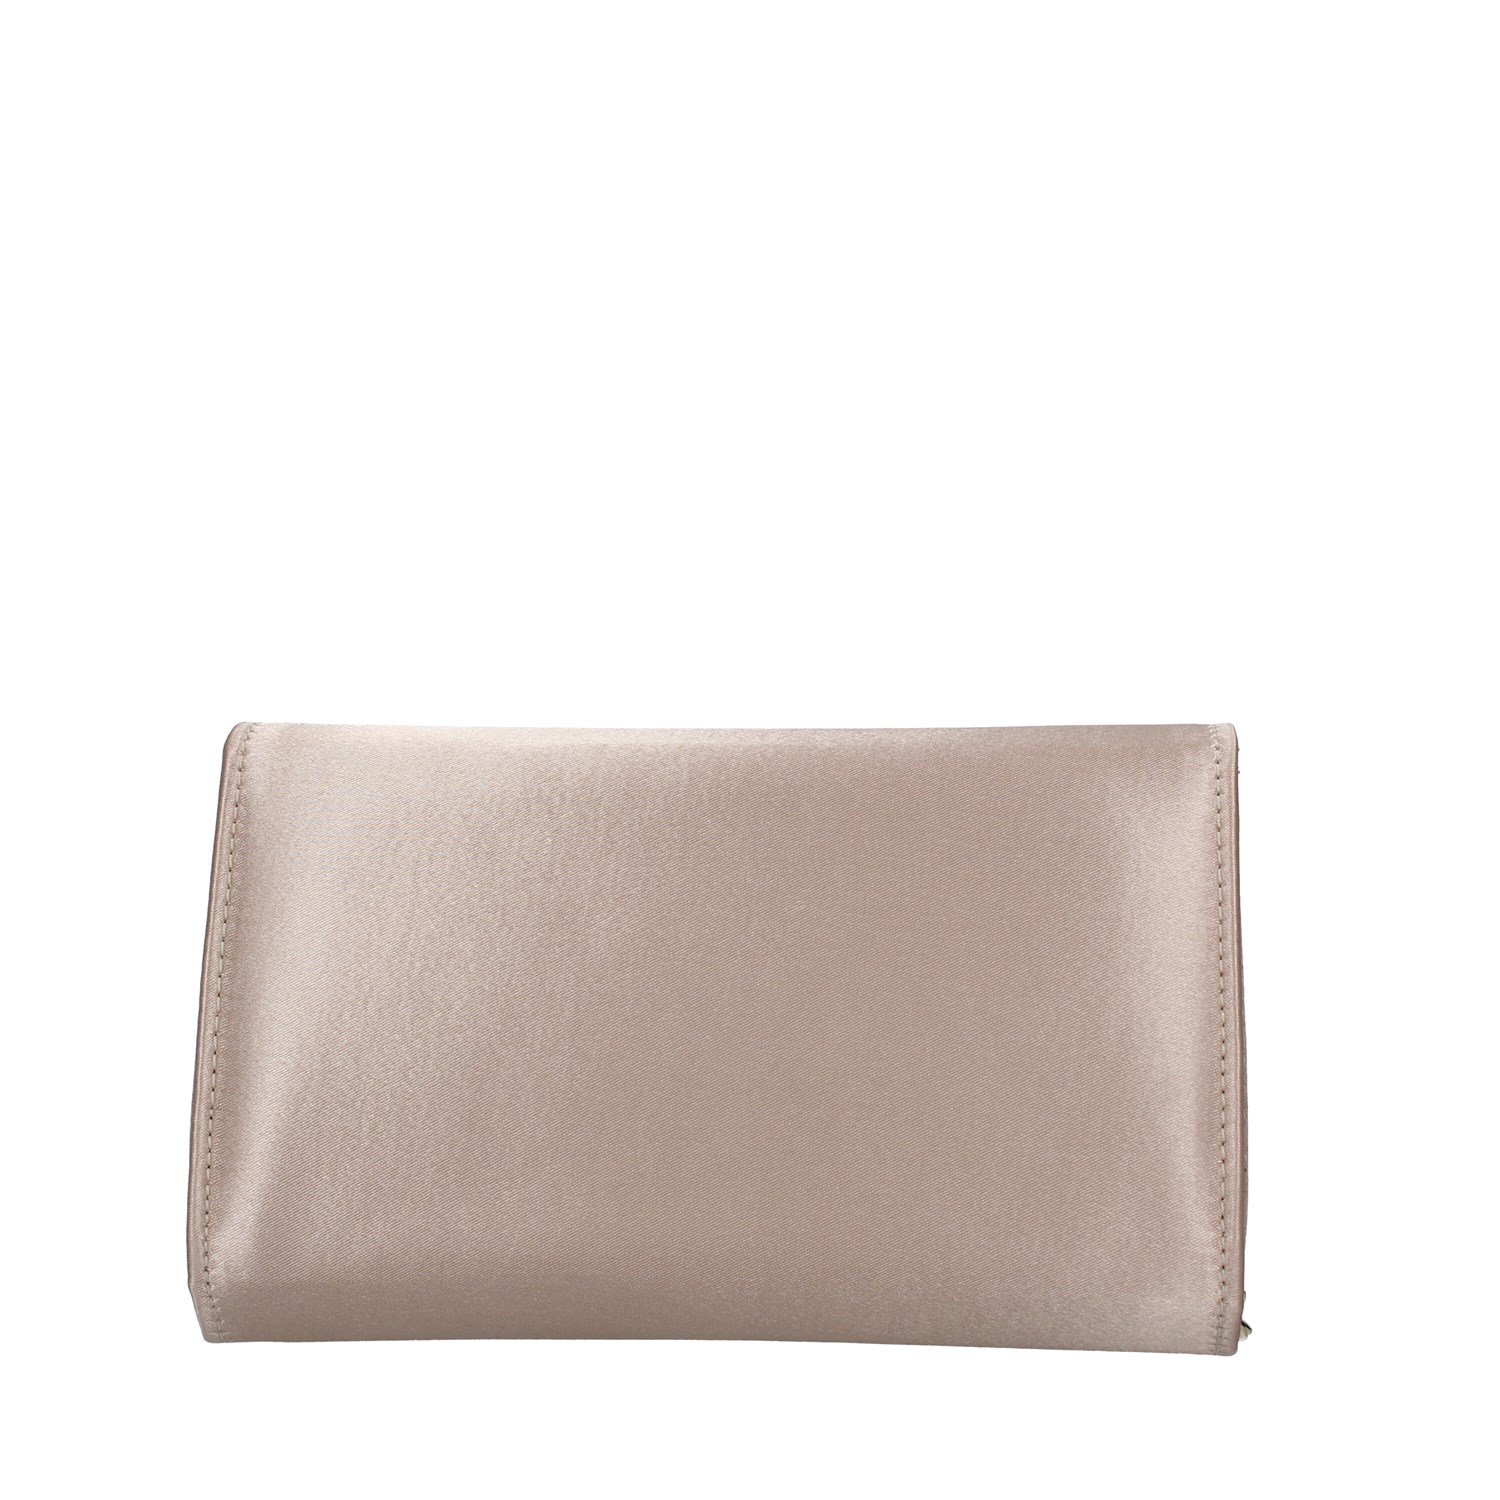 Albano Bags Accessories Clutch PINK B011SF